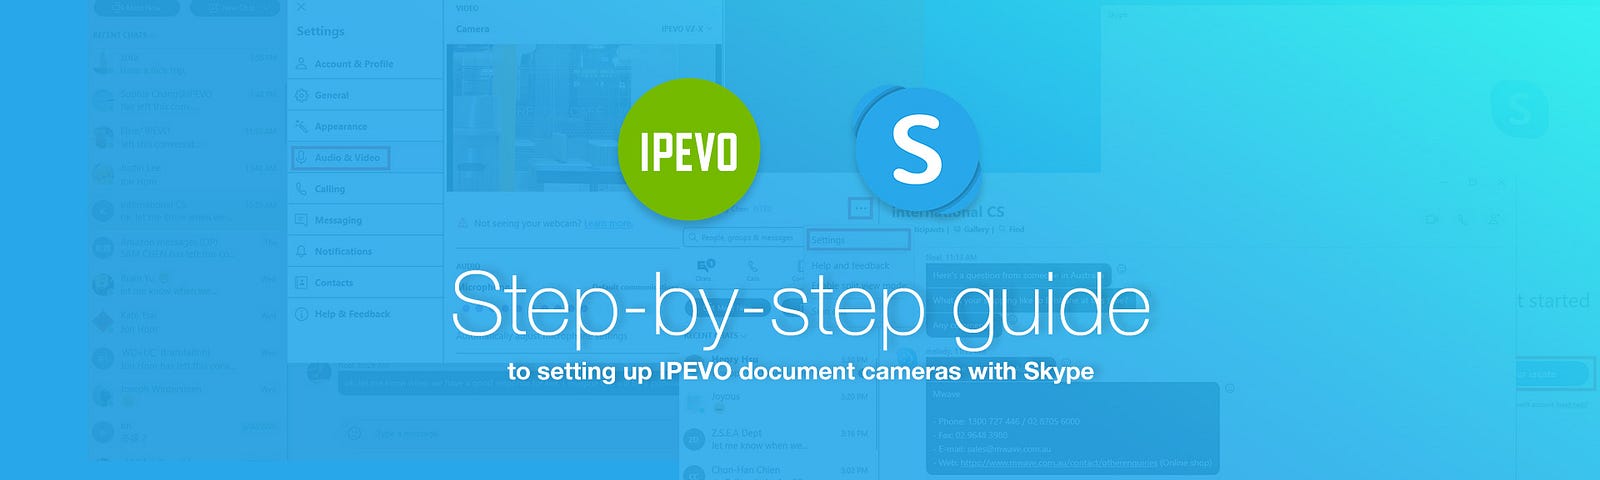 Step-by-step guide to setting up IPEVO document cameras with Skype